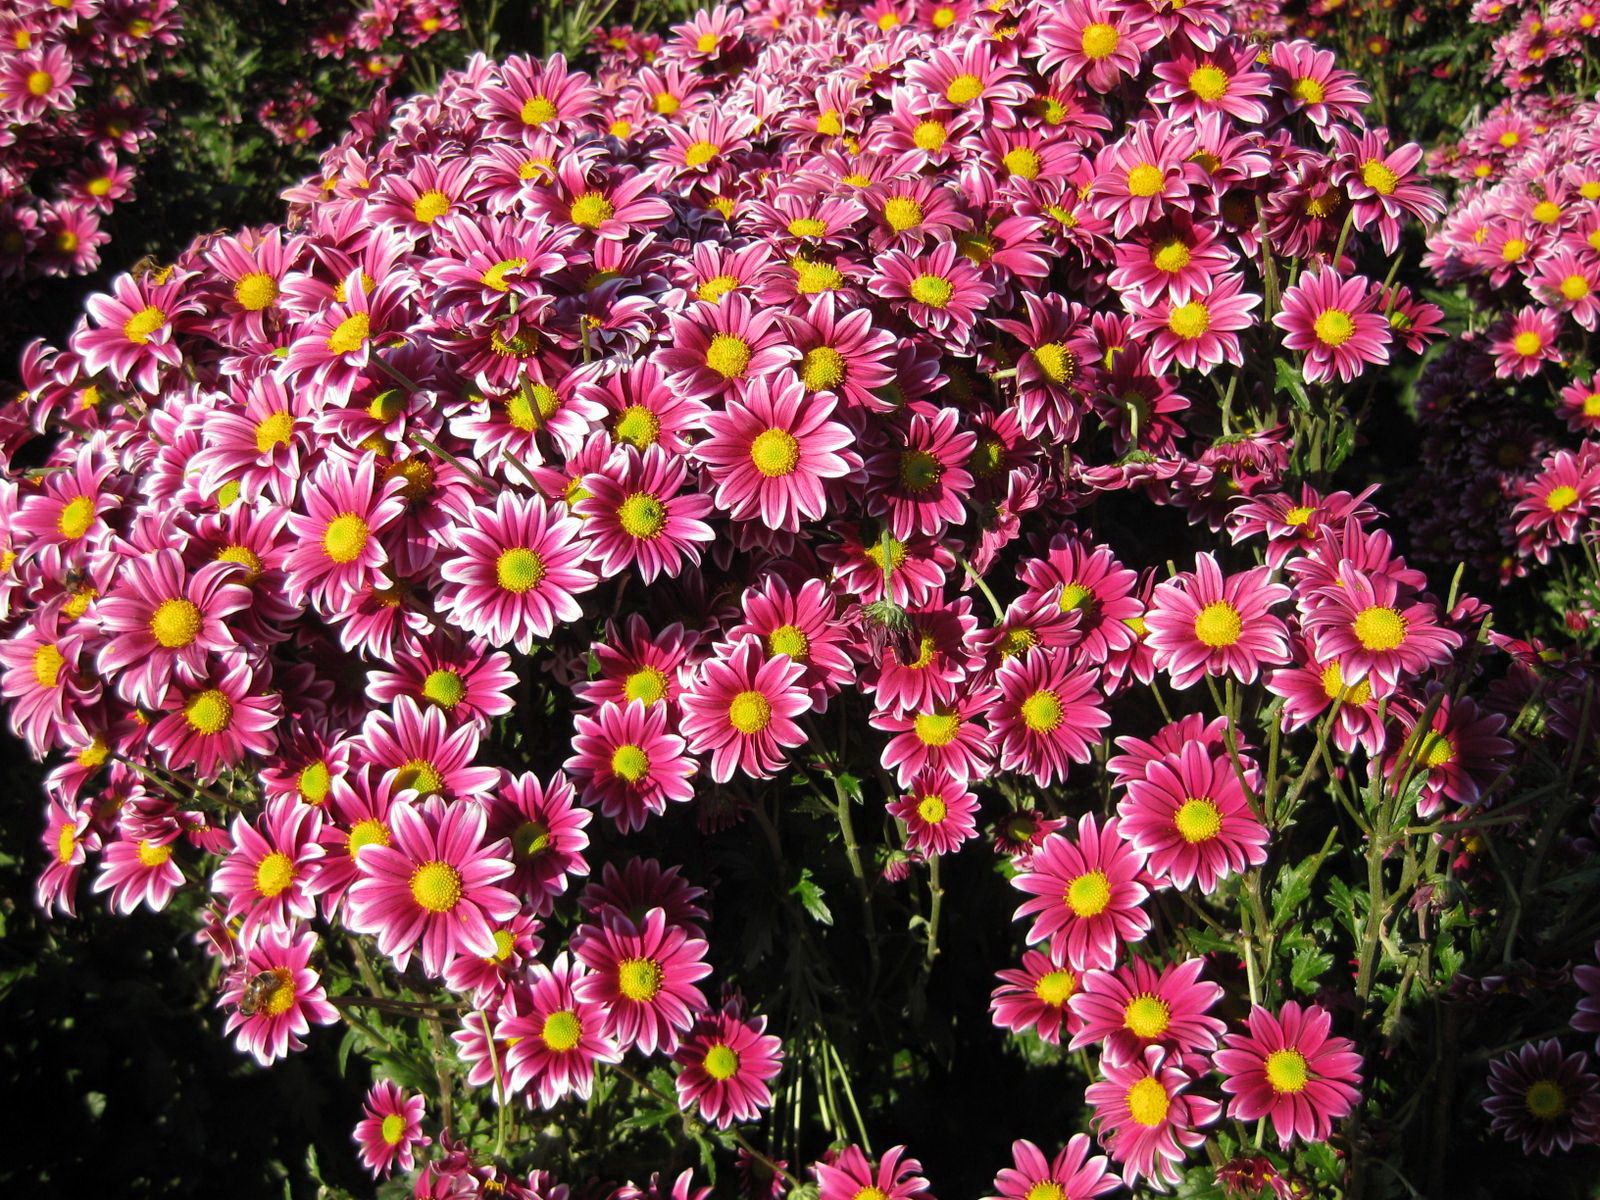 143337 download wallpaper flowers, chrysanthemum, garden, lot, sunny screensavers and pictures for free